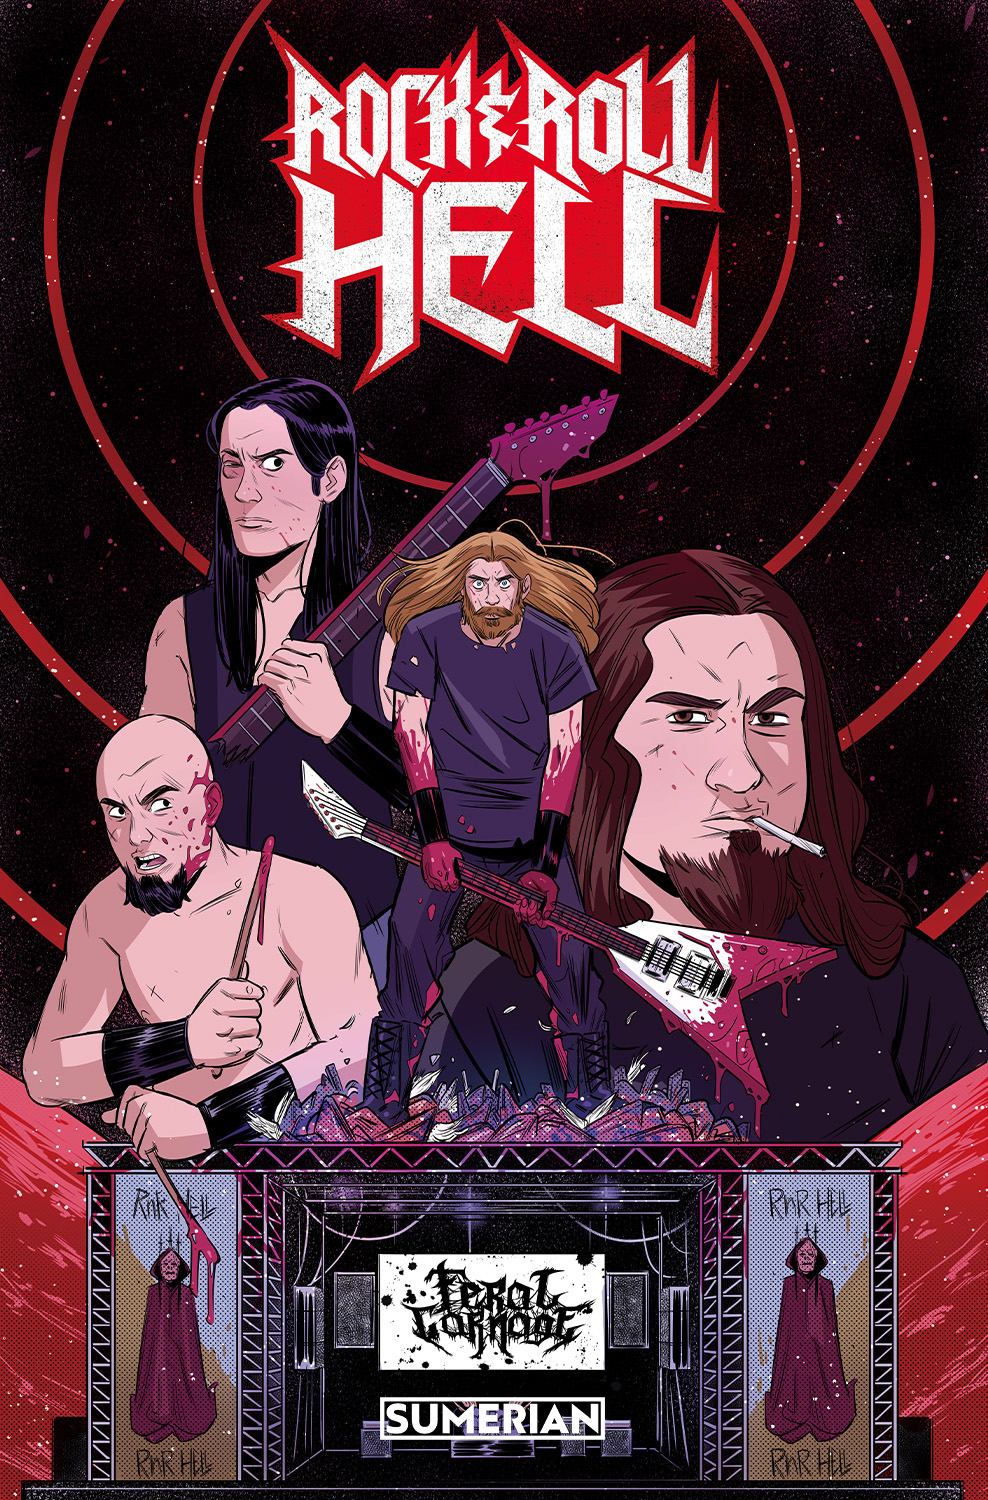 Rock & Roll Hell #1 Cover A Di Angilla (Mature) (Of 1)